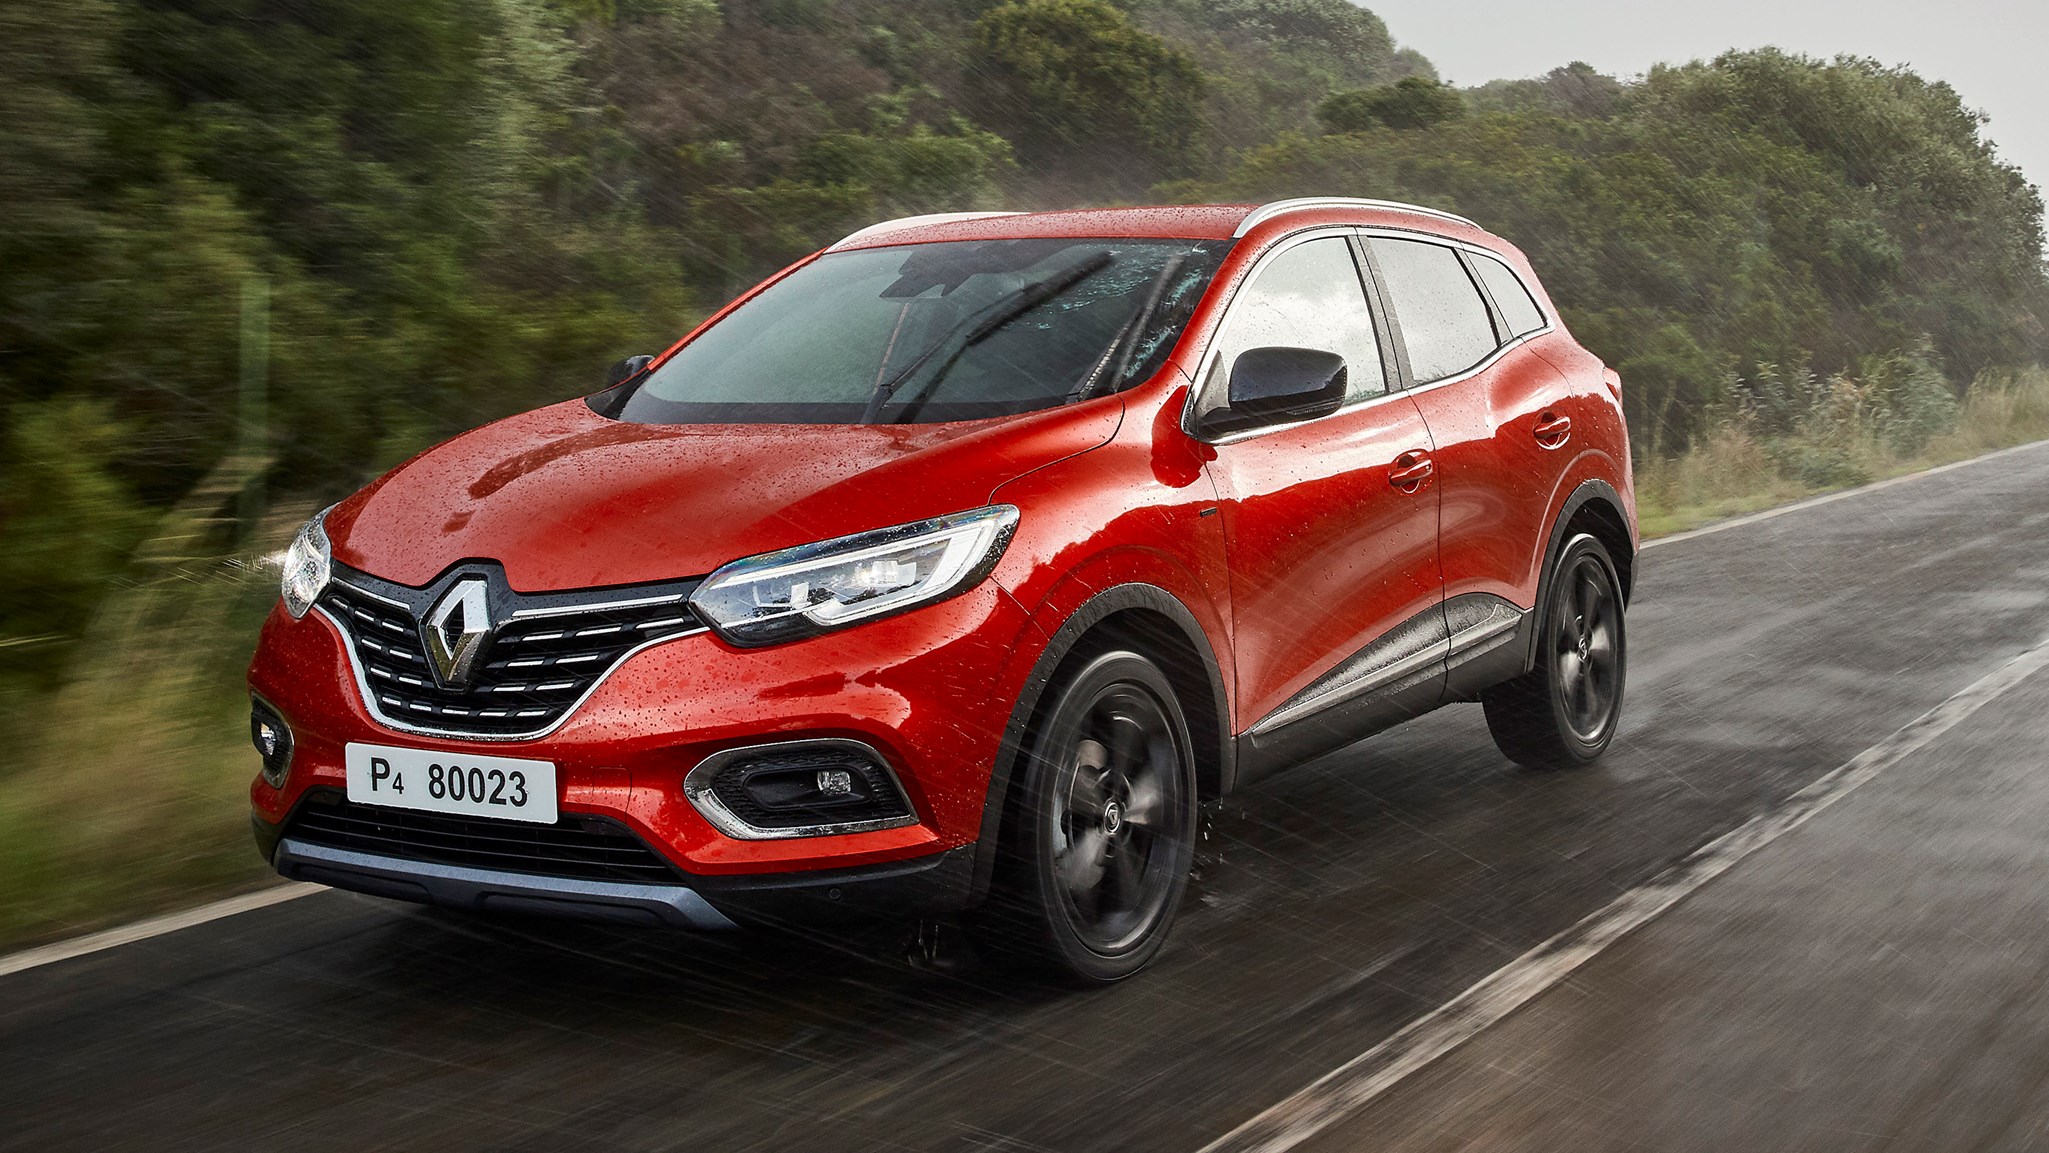 Renault Kadjar SUV (2019) review: blink and you'll miss it | CAR Magazine